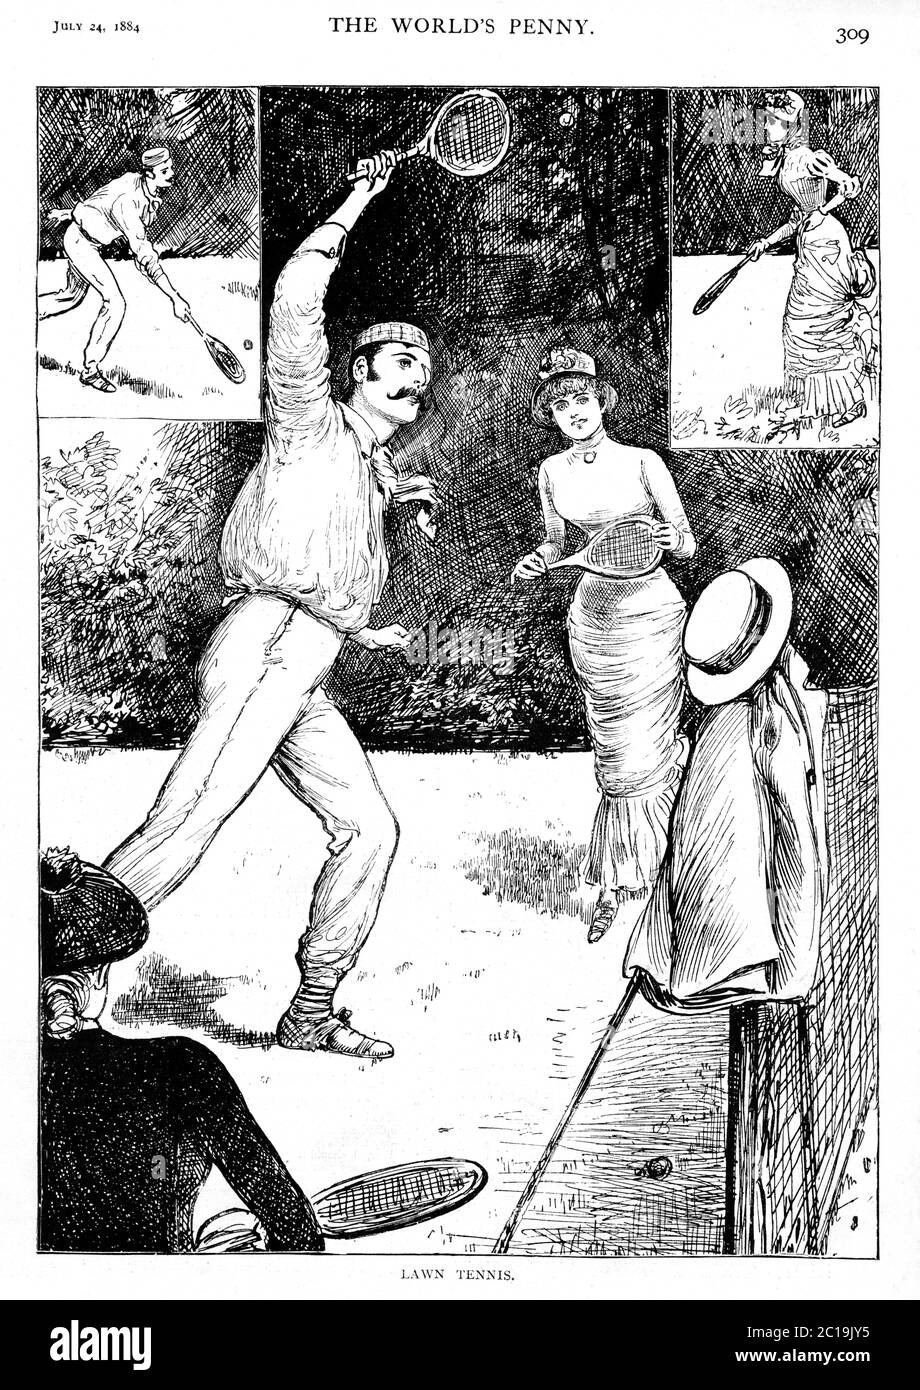 Lawn Tennis, 1884 magazine illustration of the new sport played socially by men and women on the manicured lawns of England Stock Photo